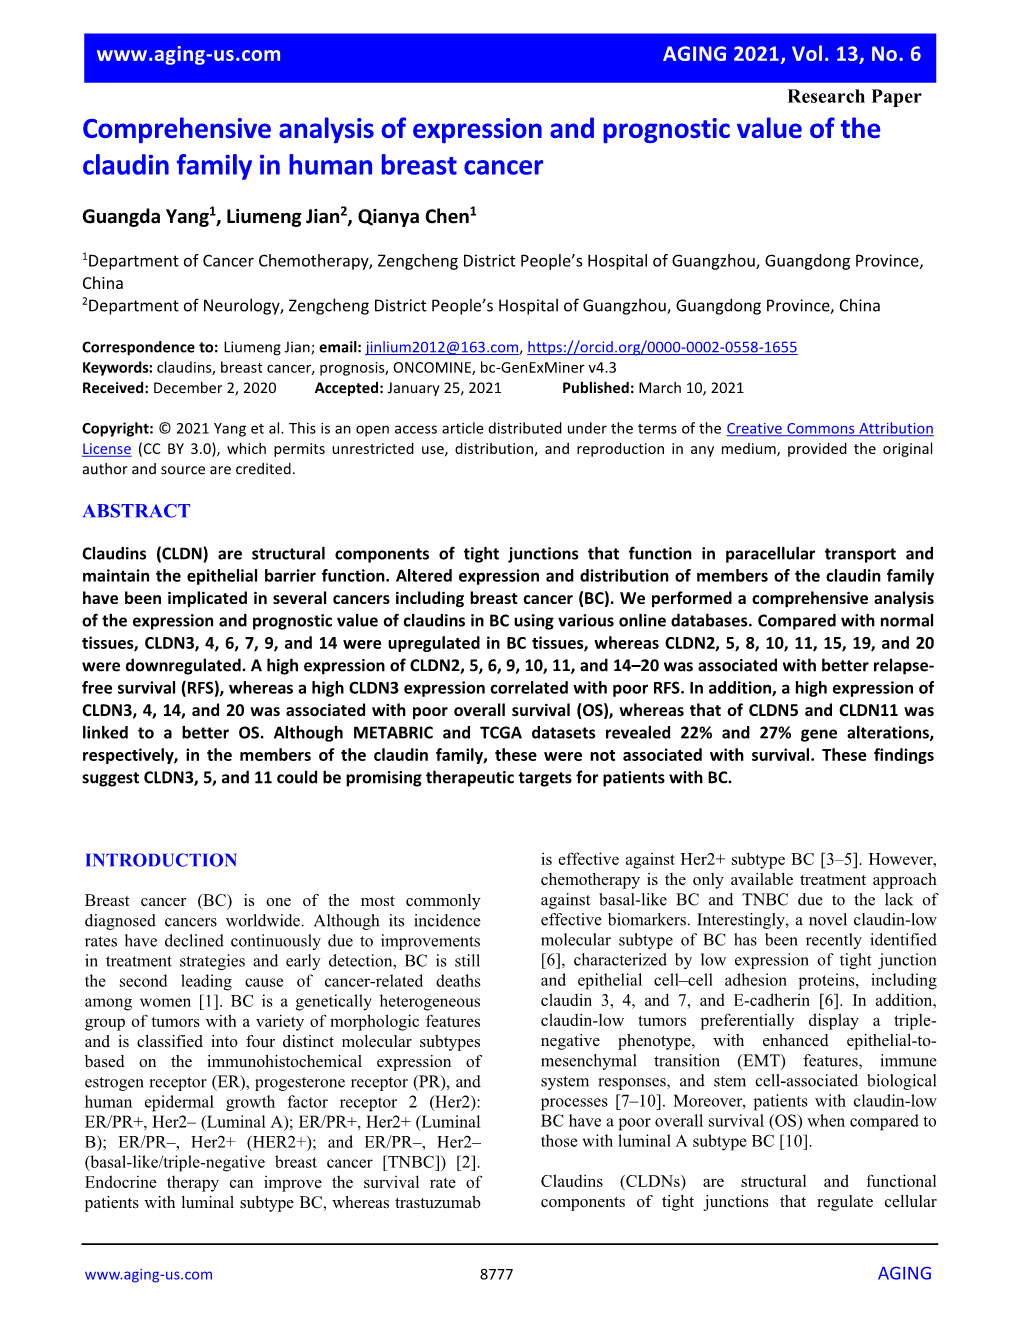 Comprehensive Analysis of Expression and Prognostic Value of the Claudin Family in Human Breast Cancer